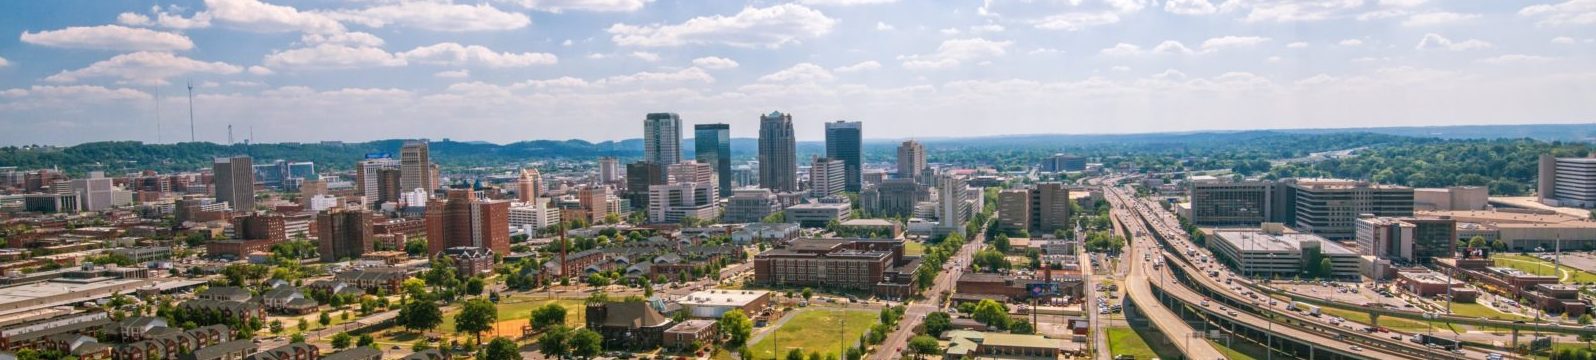 Pictured: A cityscape of Birmingham, Alabama.